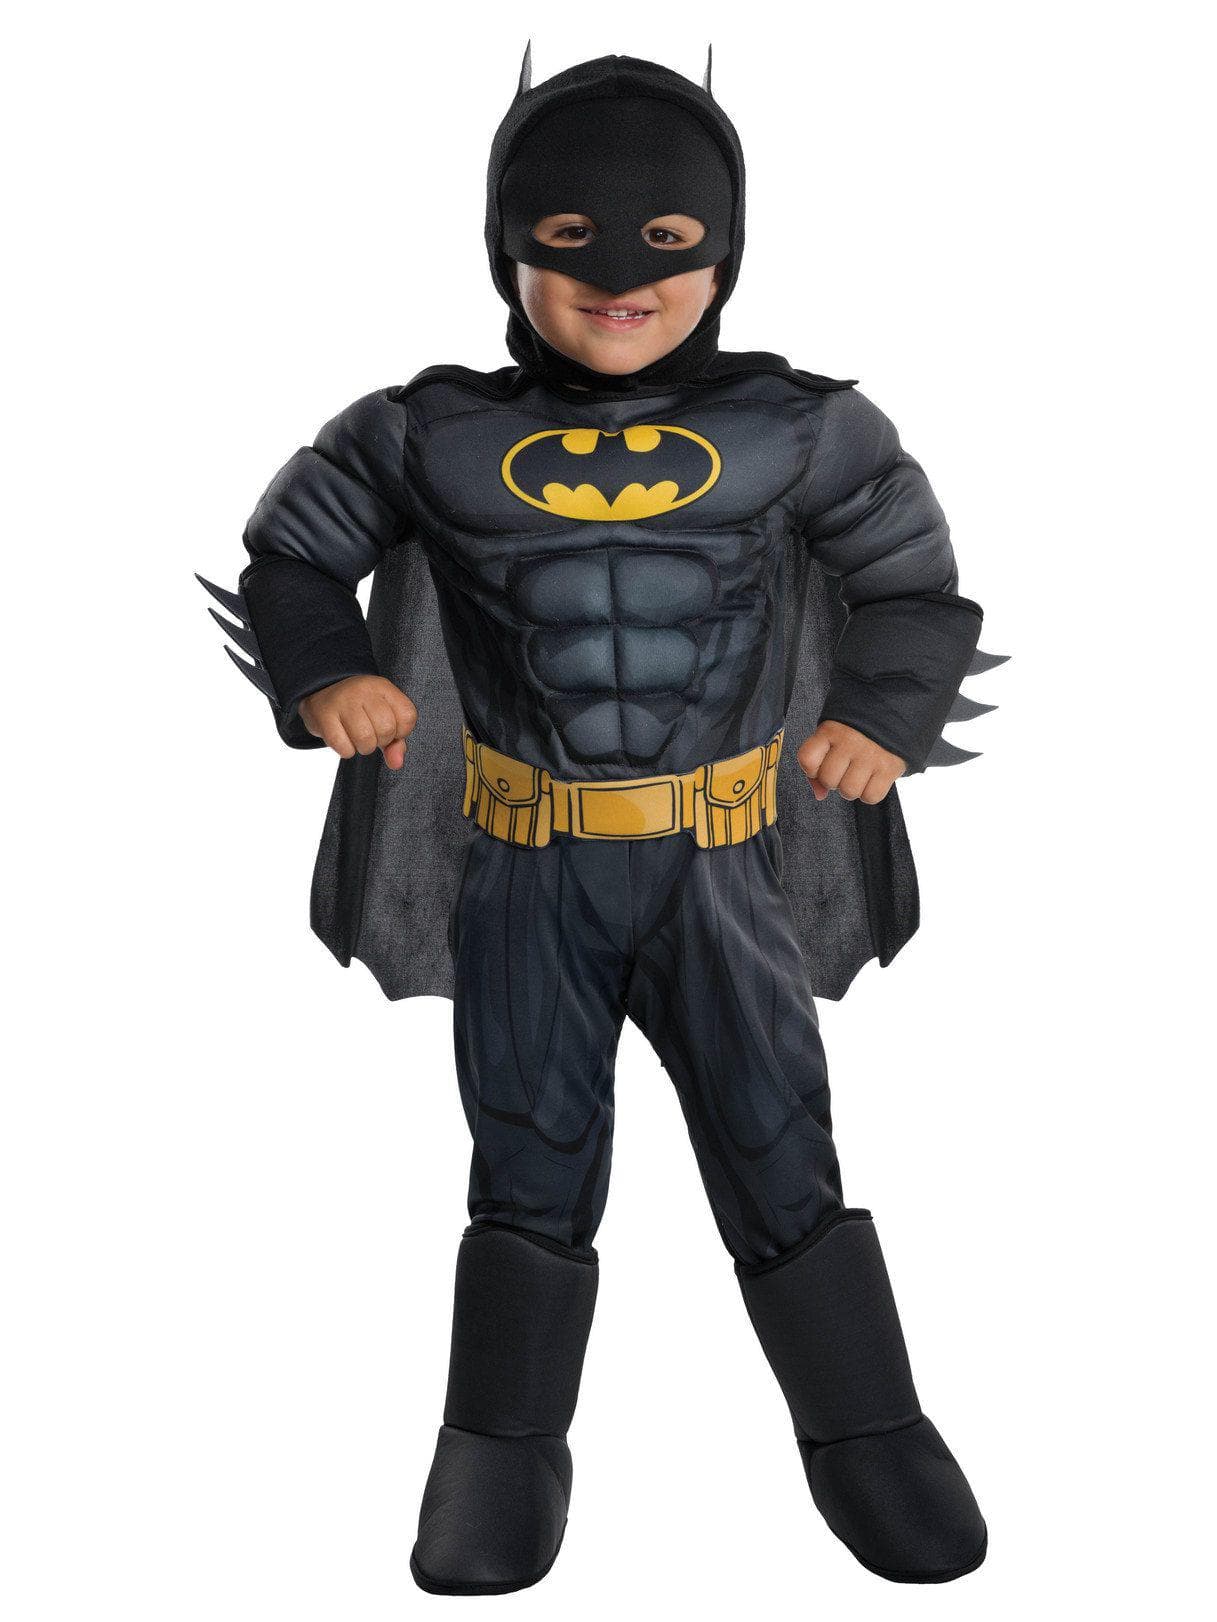 Baby/Toddler Justice League Batman Deluxe Costume - costumes.com